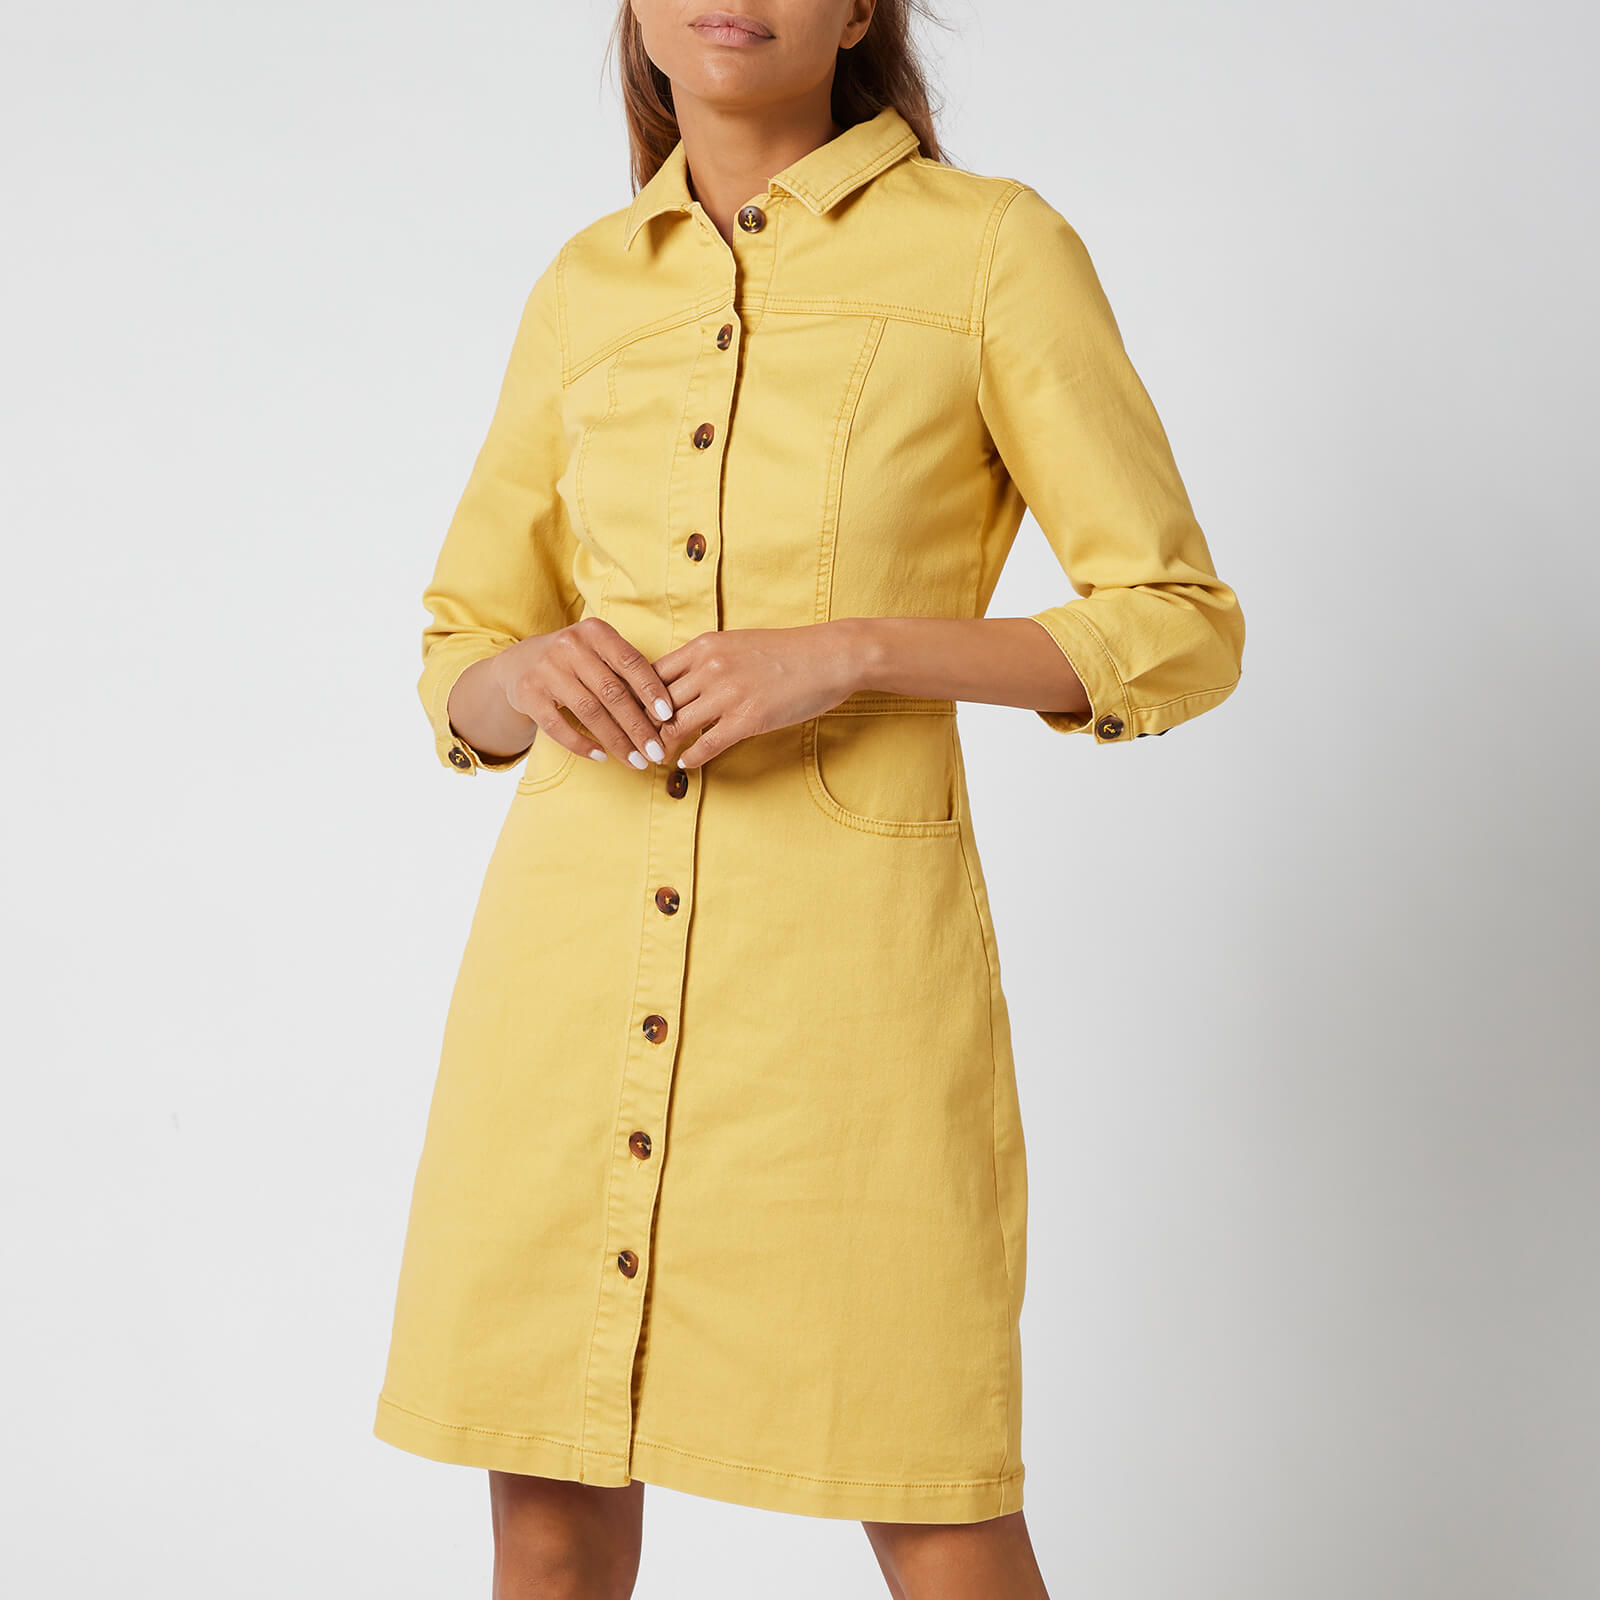 Joules Women's Wilmer Dress - Misted Yellow - UK 6